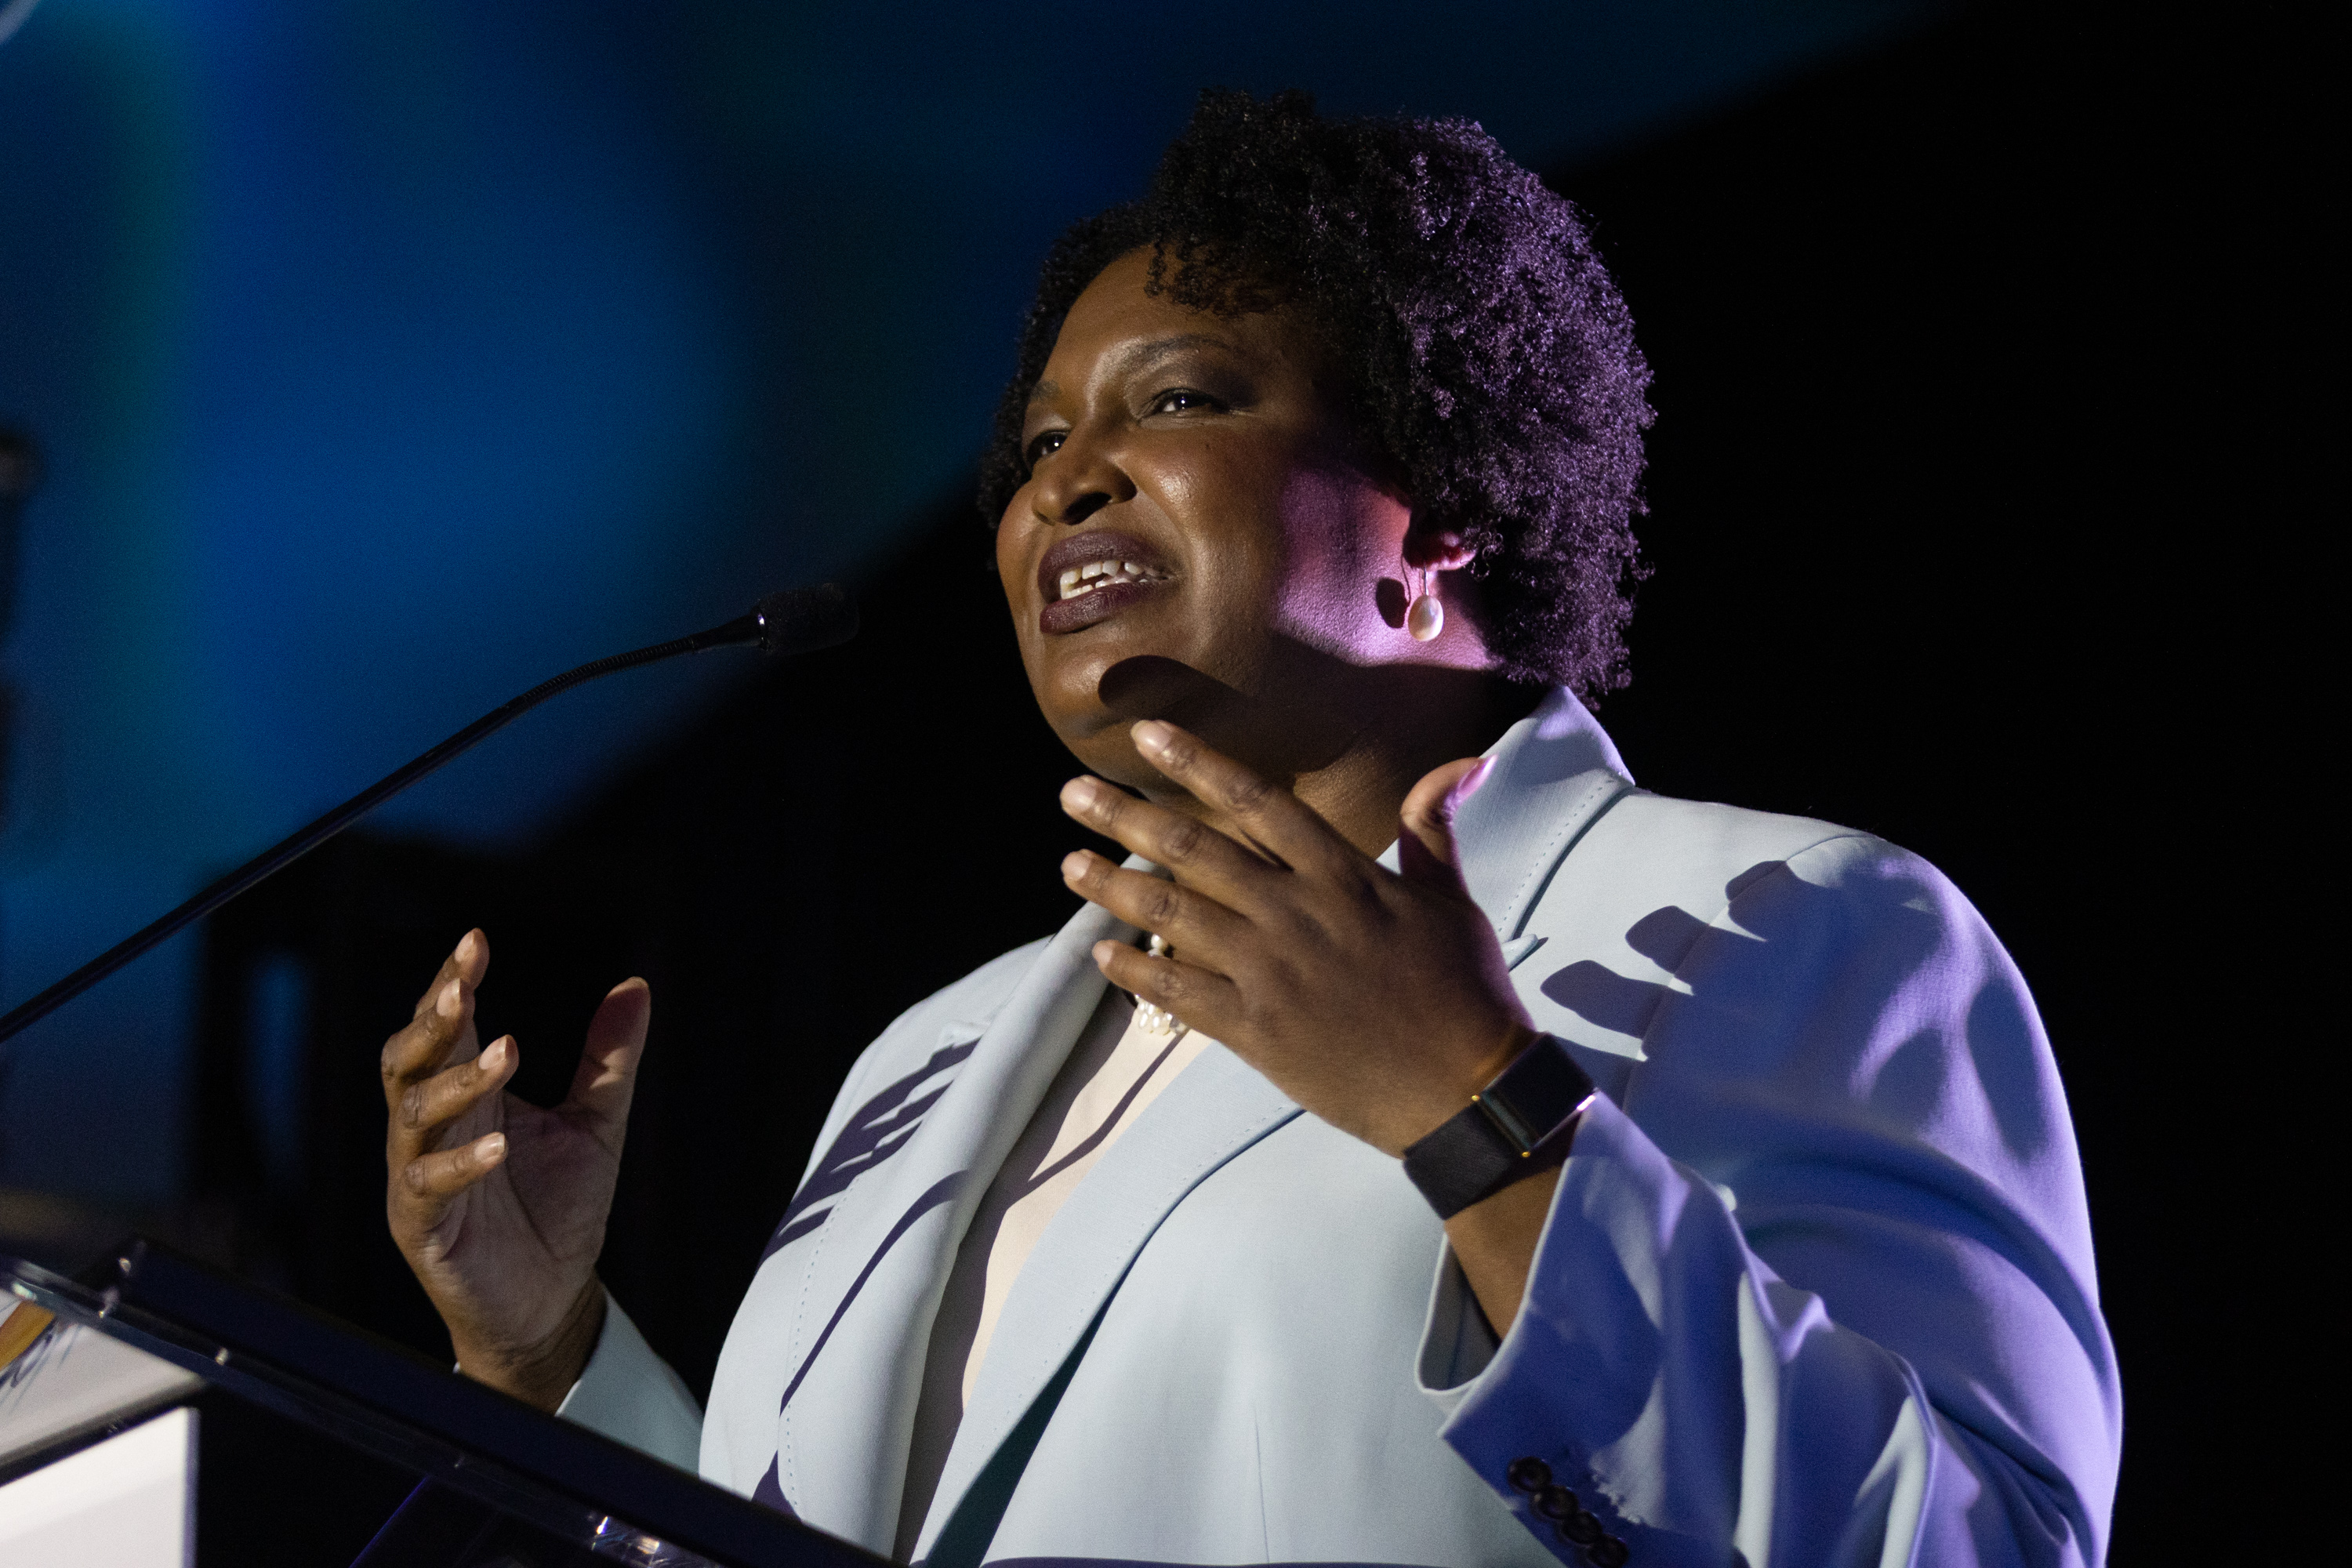 Stacey Abrams speaks at the Democratic Party of Georgia’s State Convention in Columbus, Georgia, Saturday, August 27, 2022. Schaefer/steve.schaefer@ajc.com)